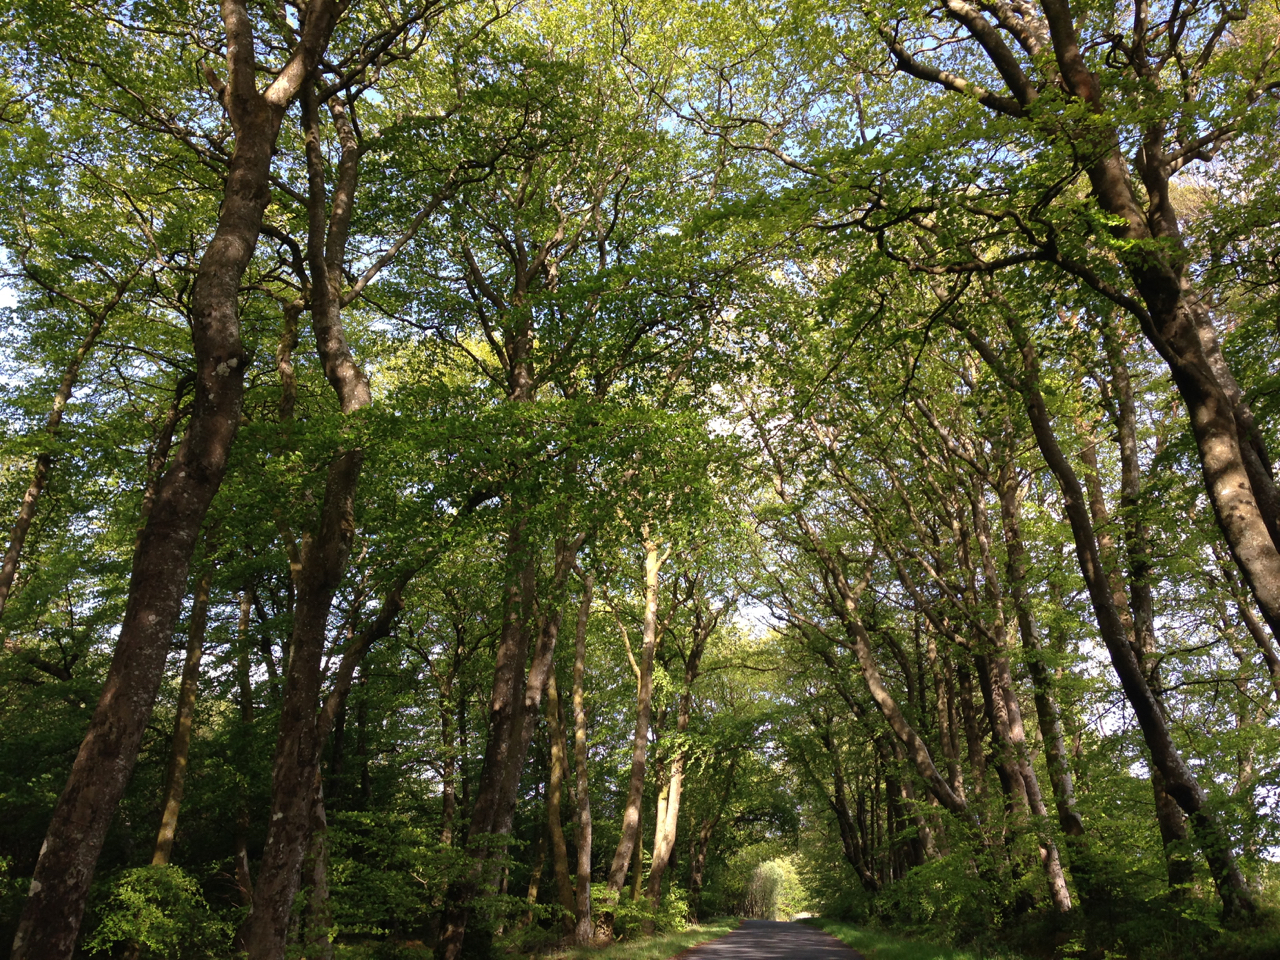 Birdsong and beech trees…